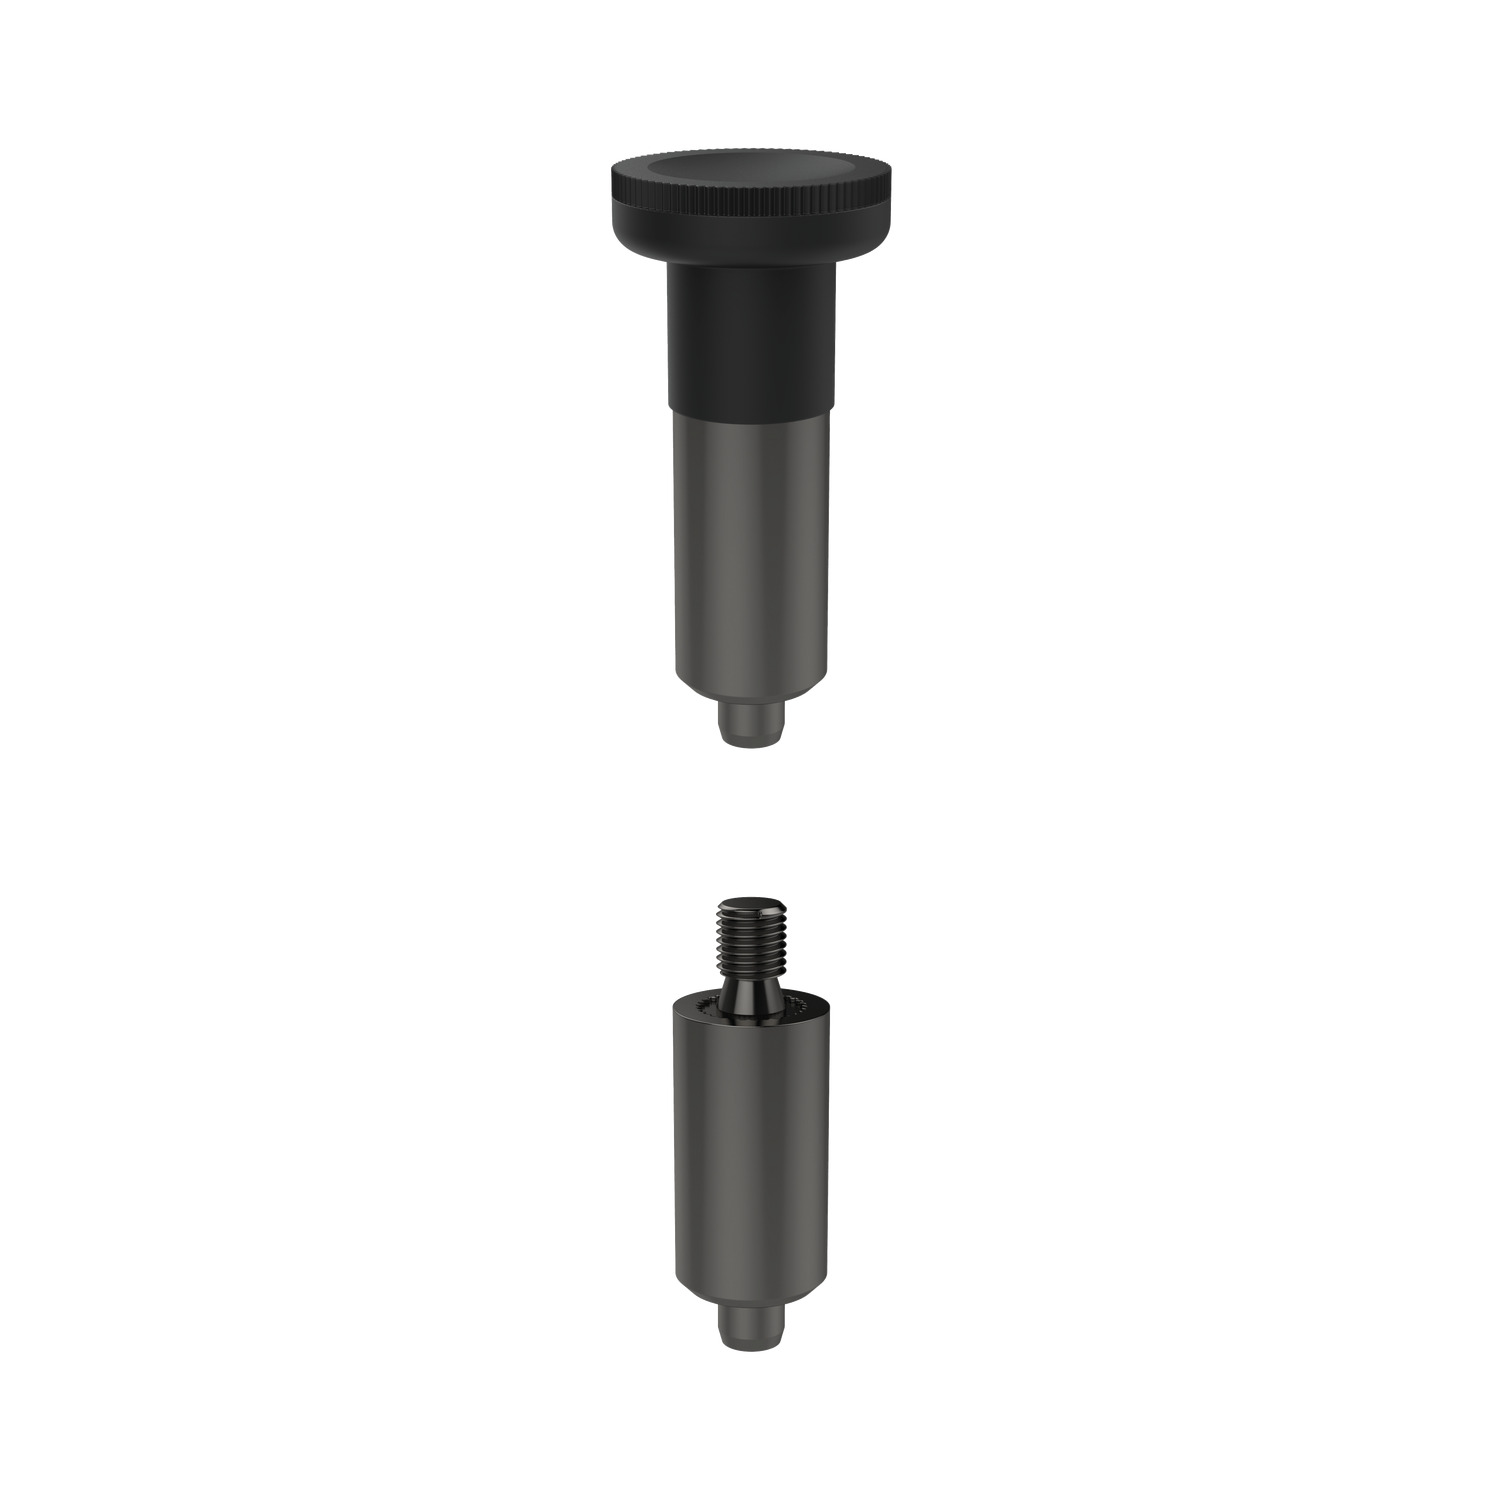 Index Plunger - Pull Grip Non-locking-plunger springs back when pull handle is released. The product is designed to be welded or glued in place.